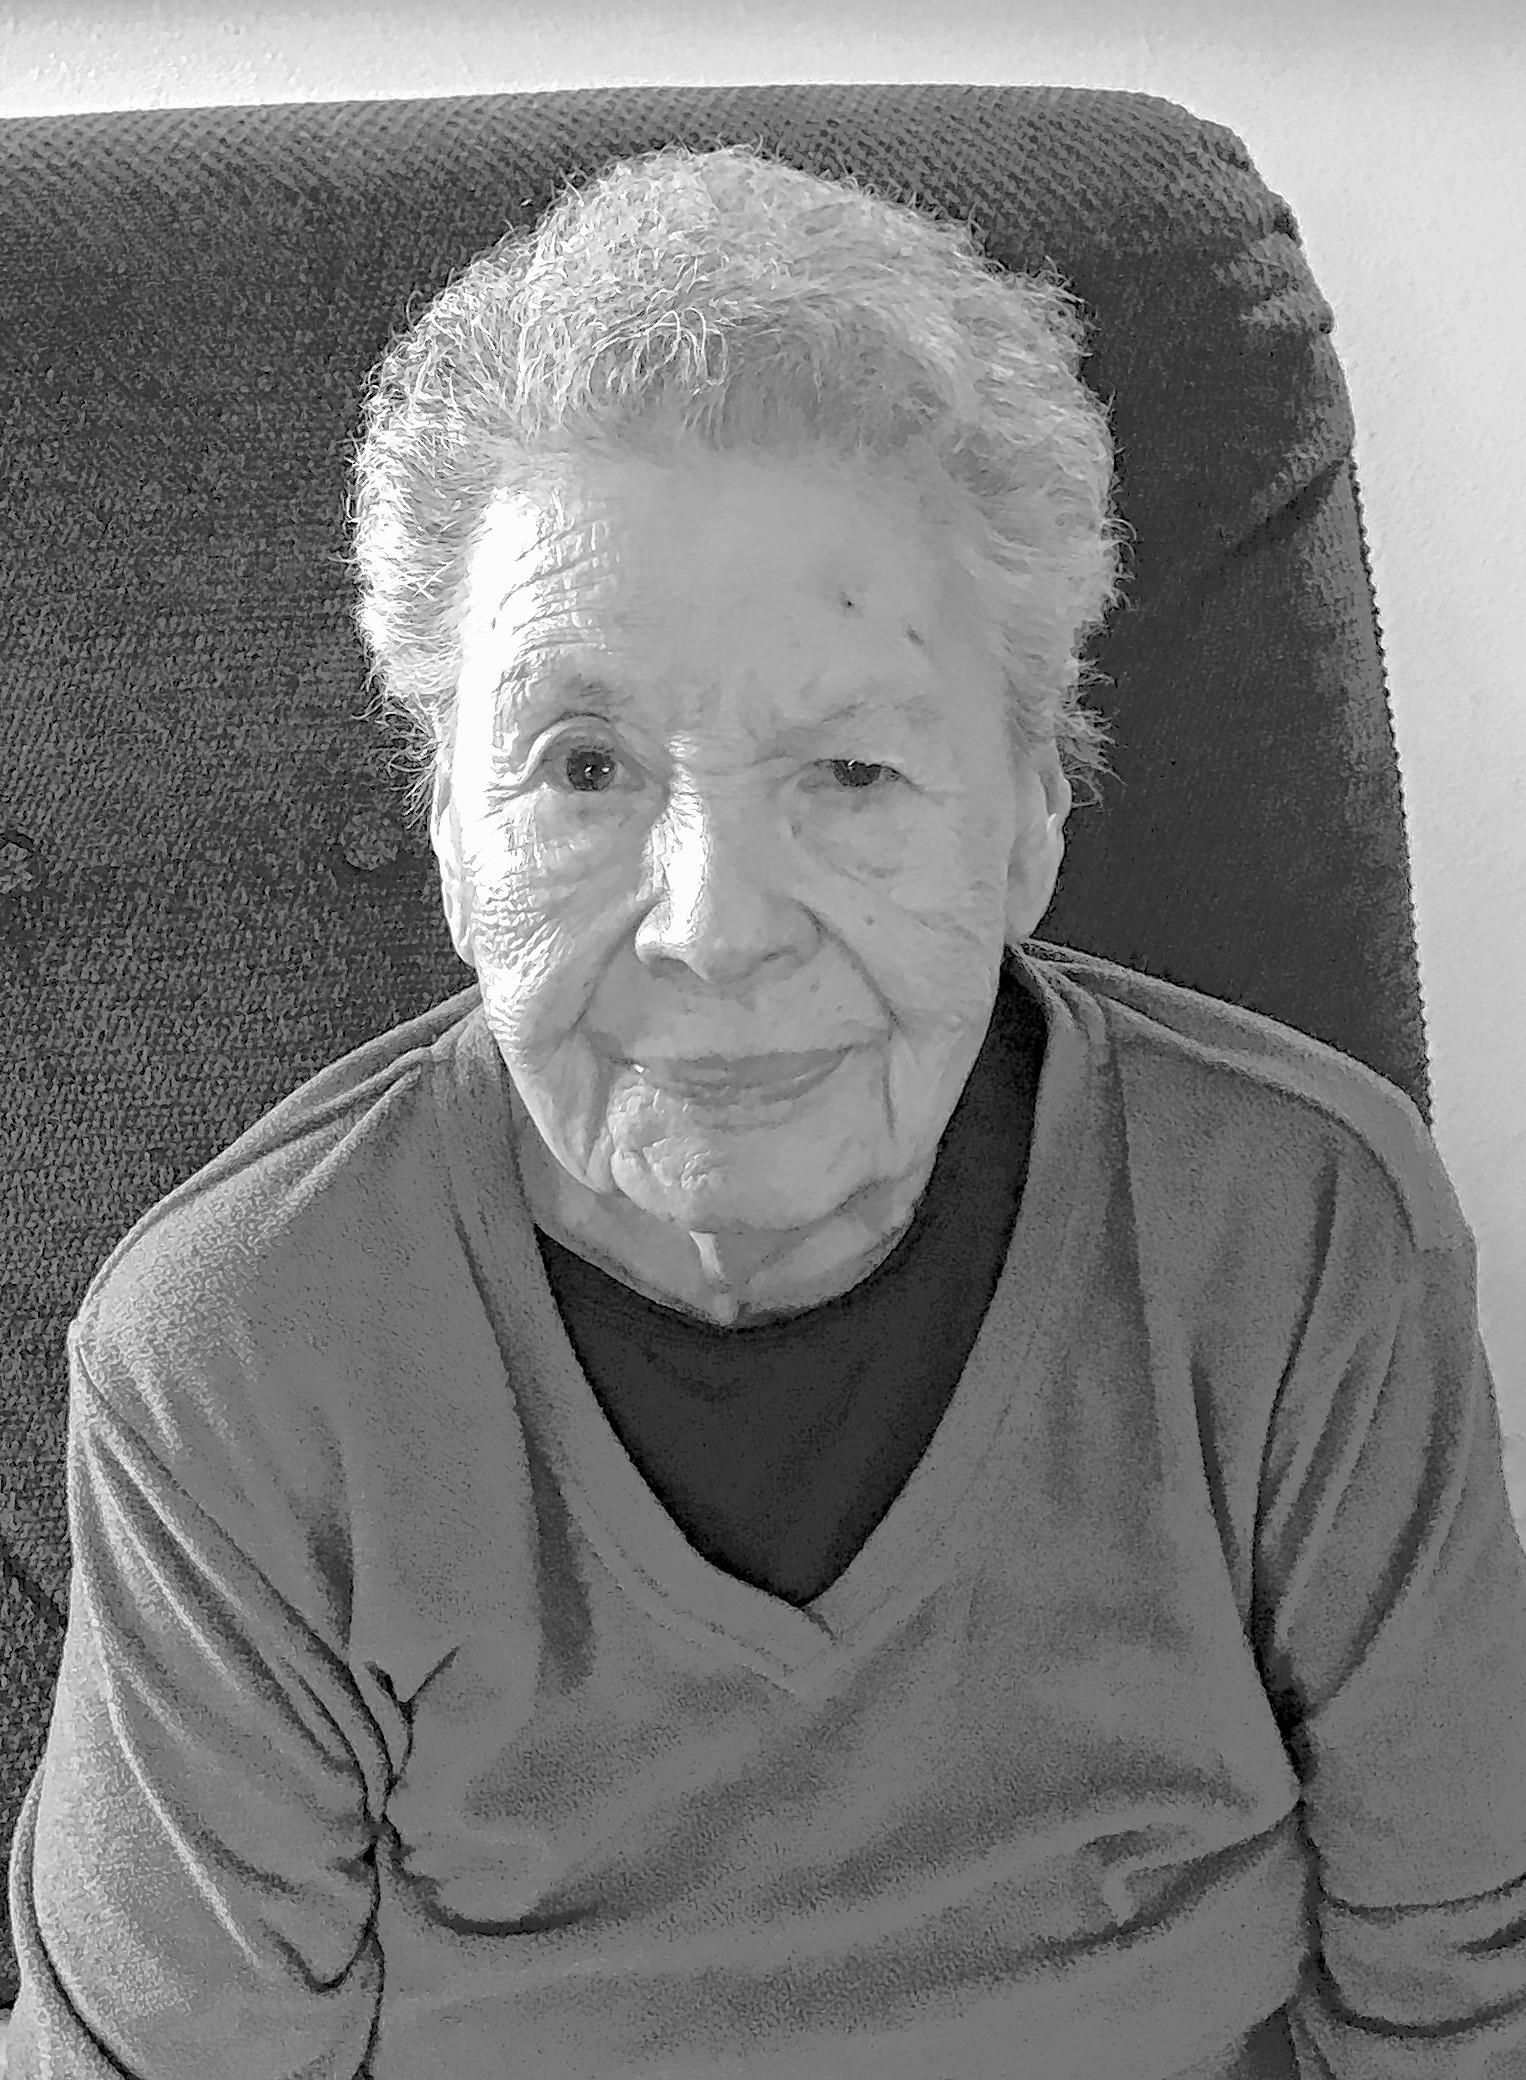 Wilema A. Tingley March 6, 1926-Jan. 9, 2017